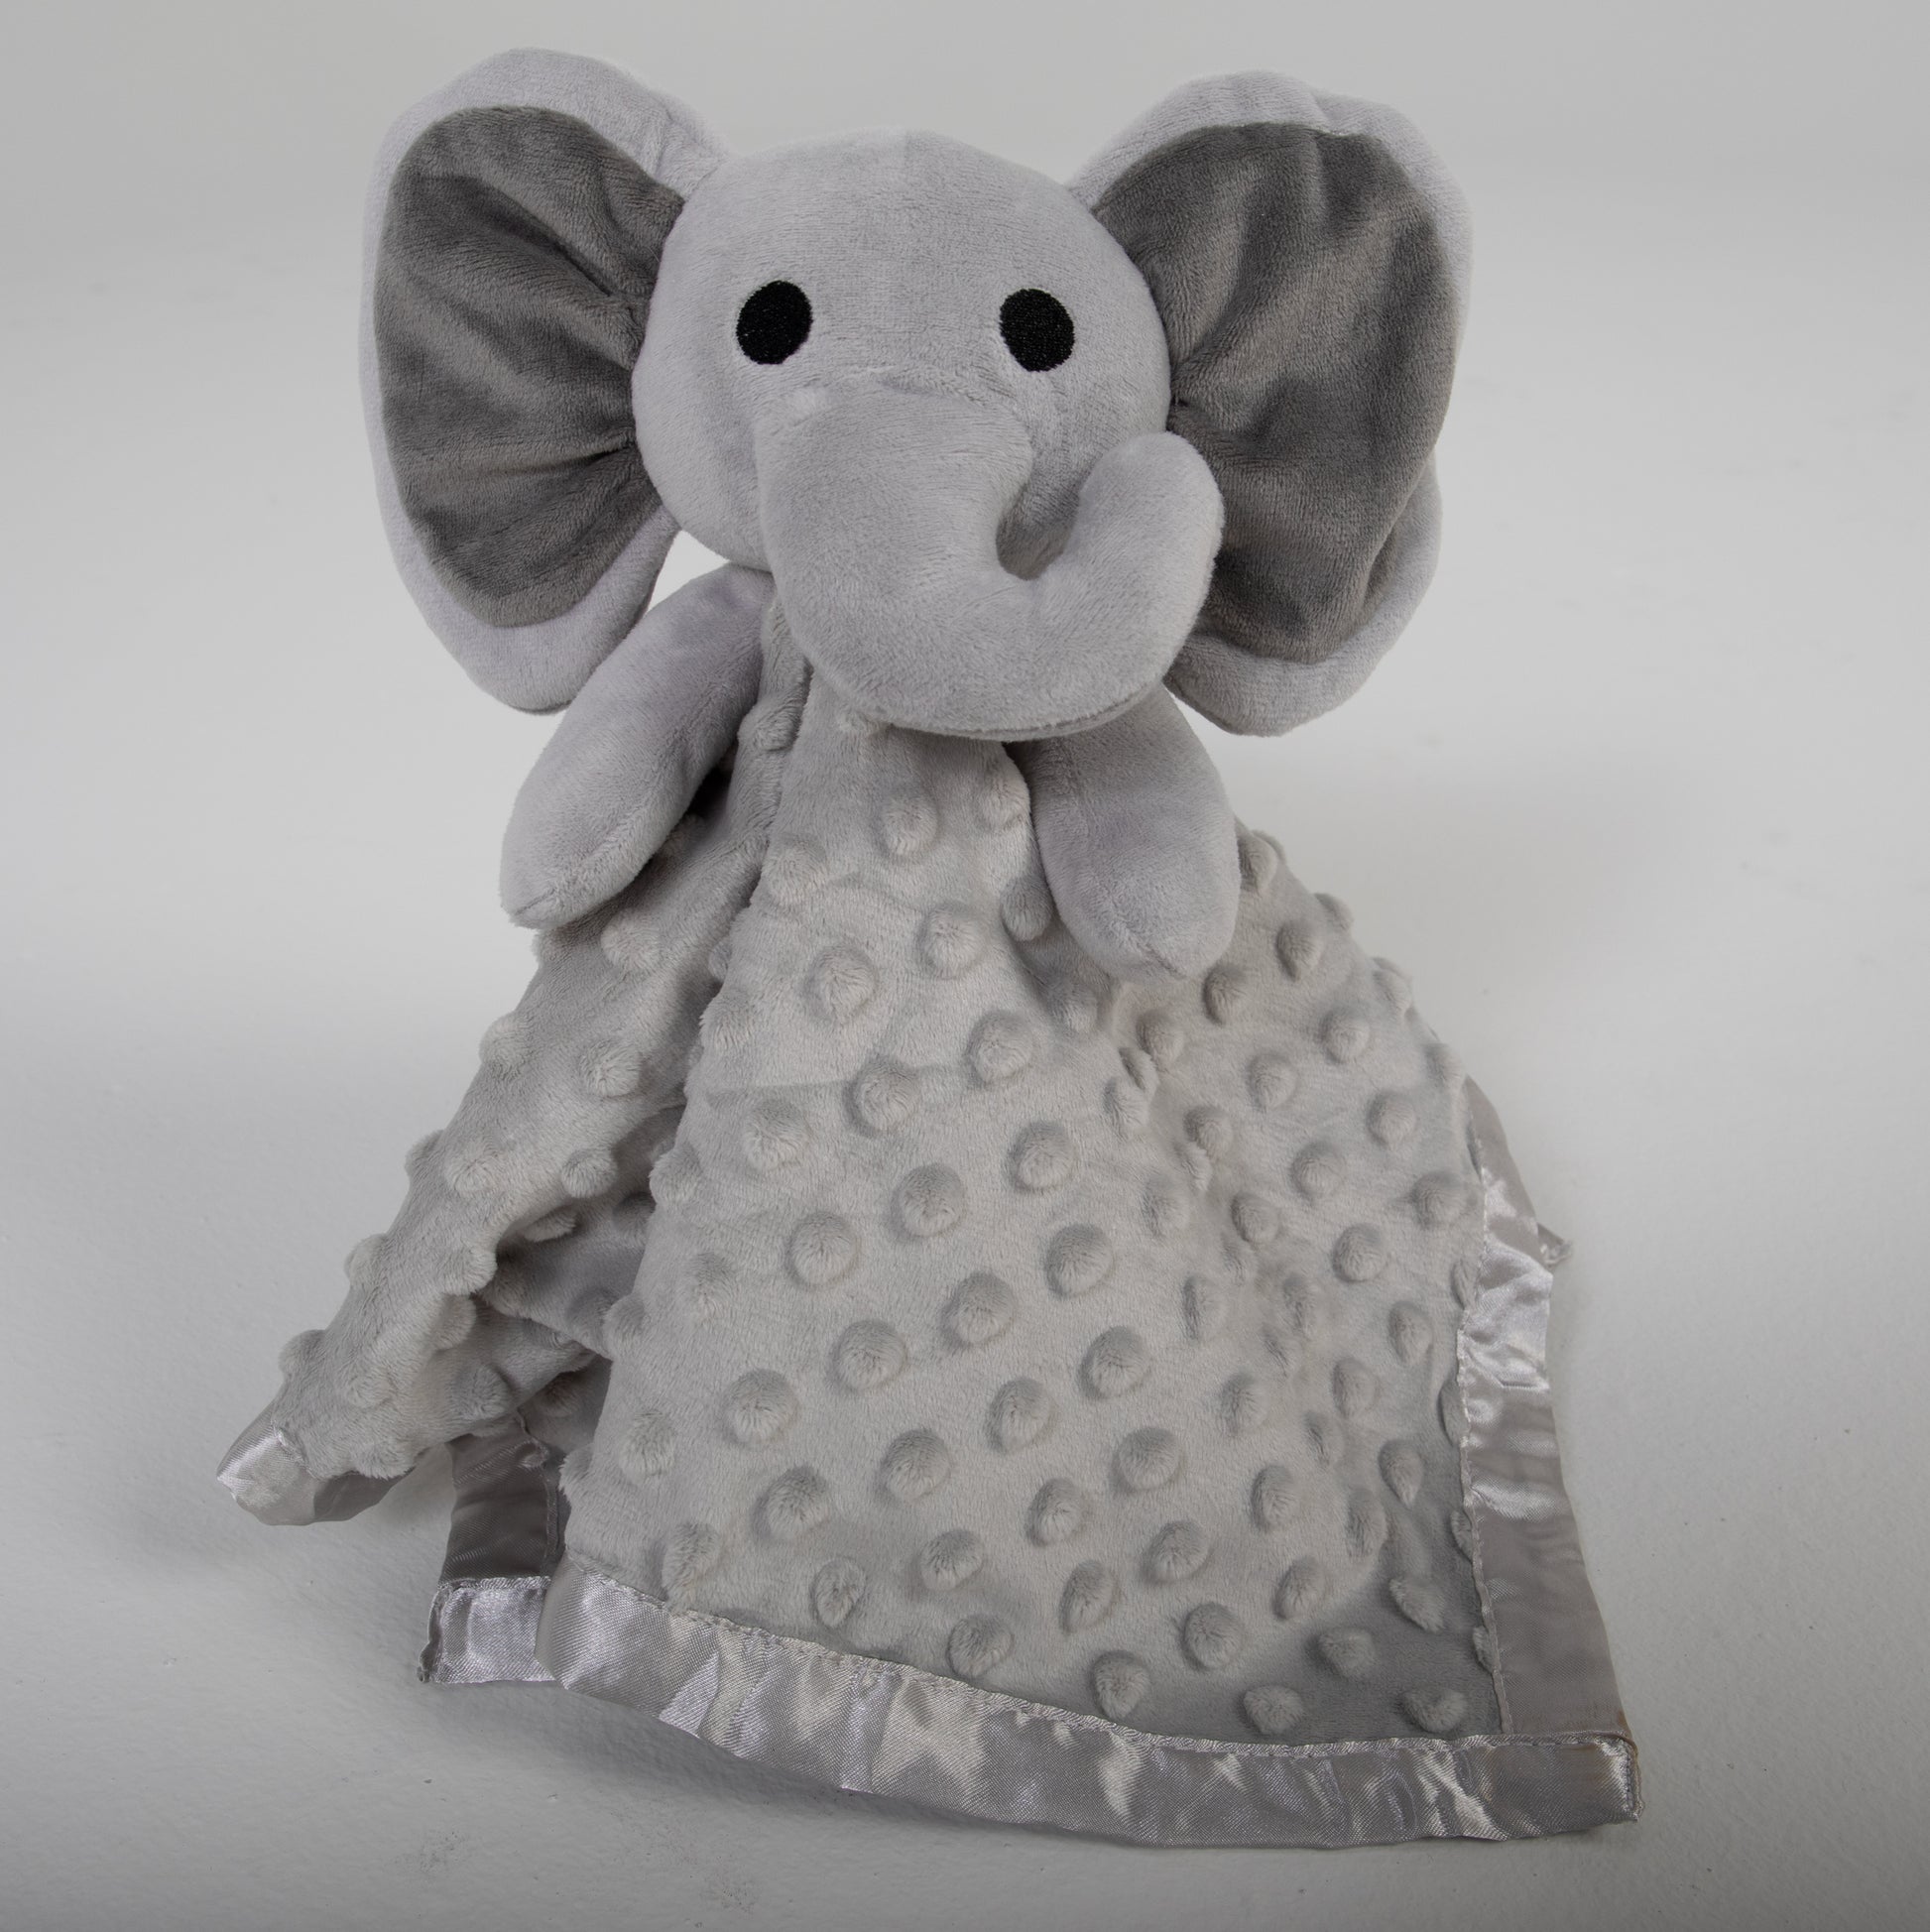 Woodland Friends Enchanted Circus Plush Elephant Lovey and Security Blanket